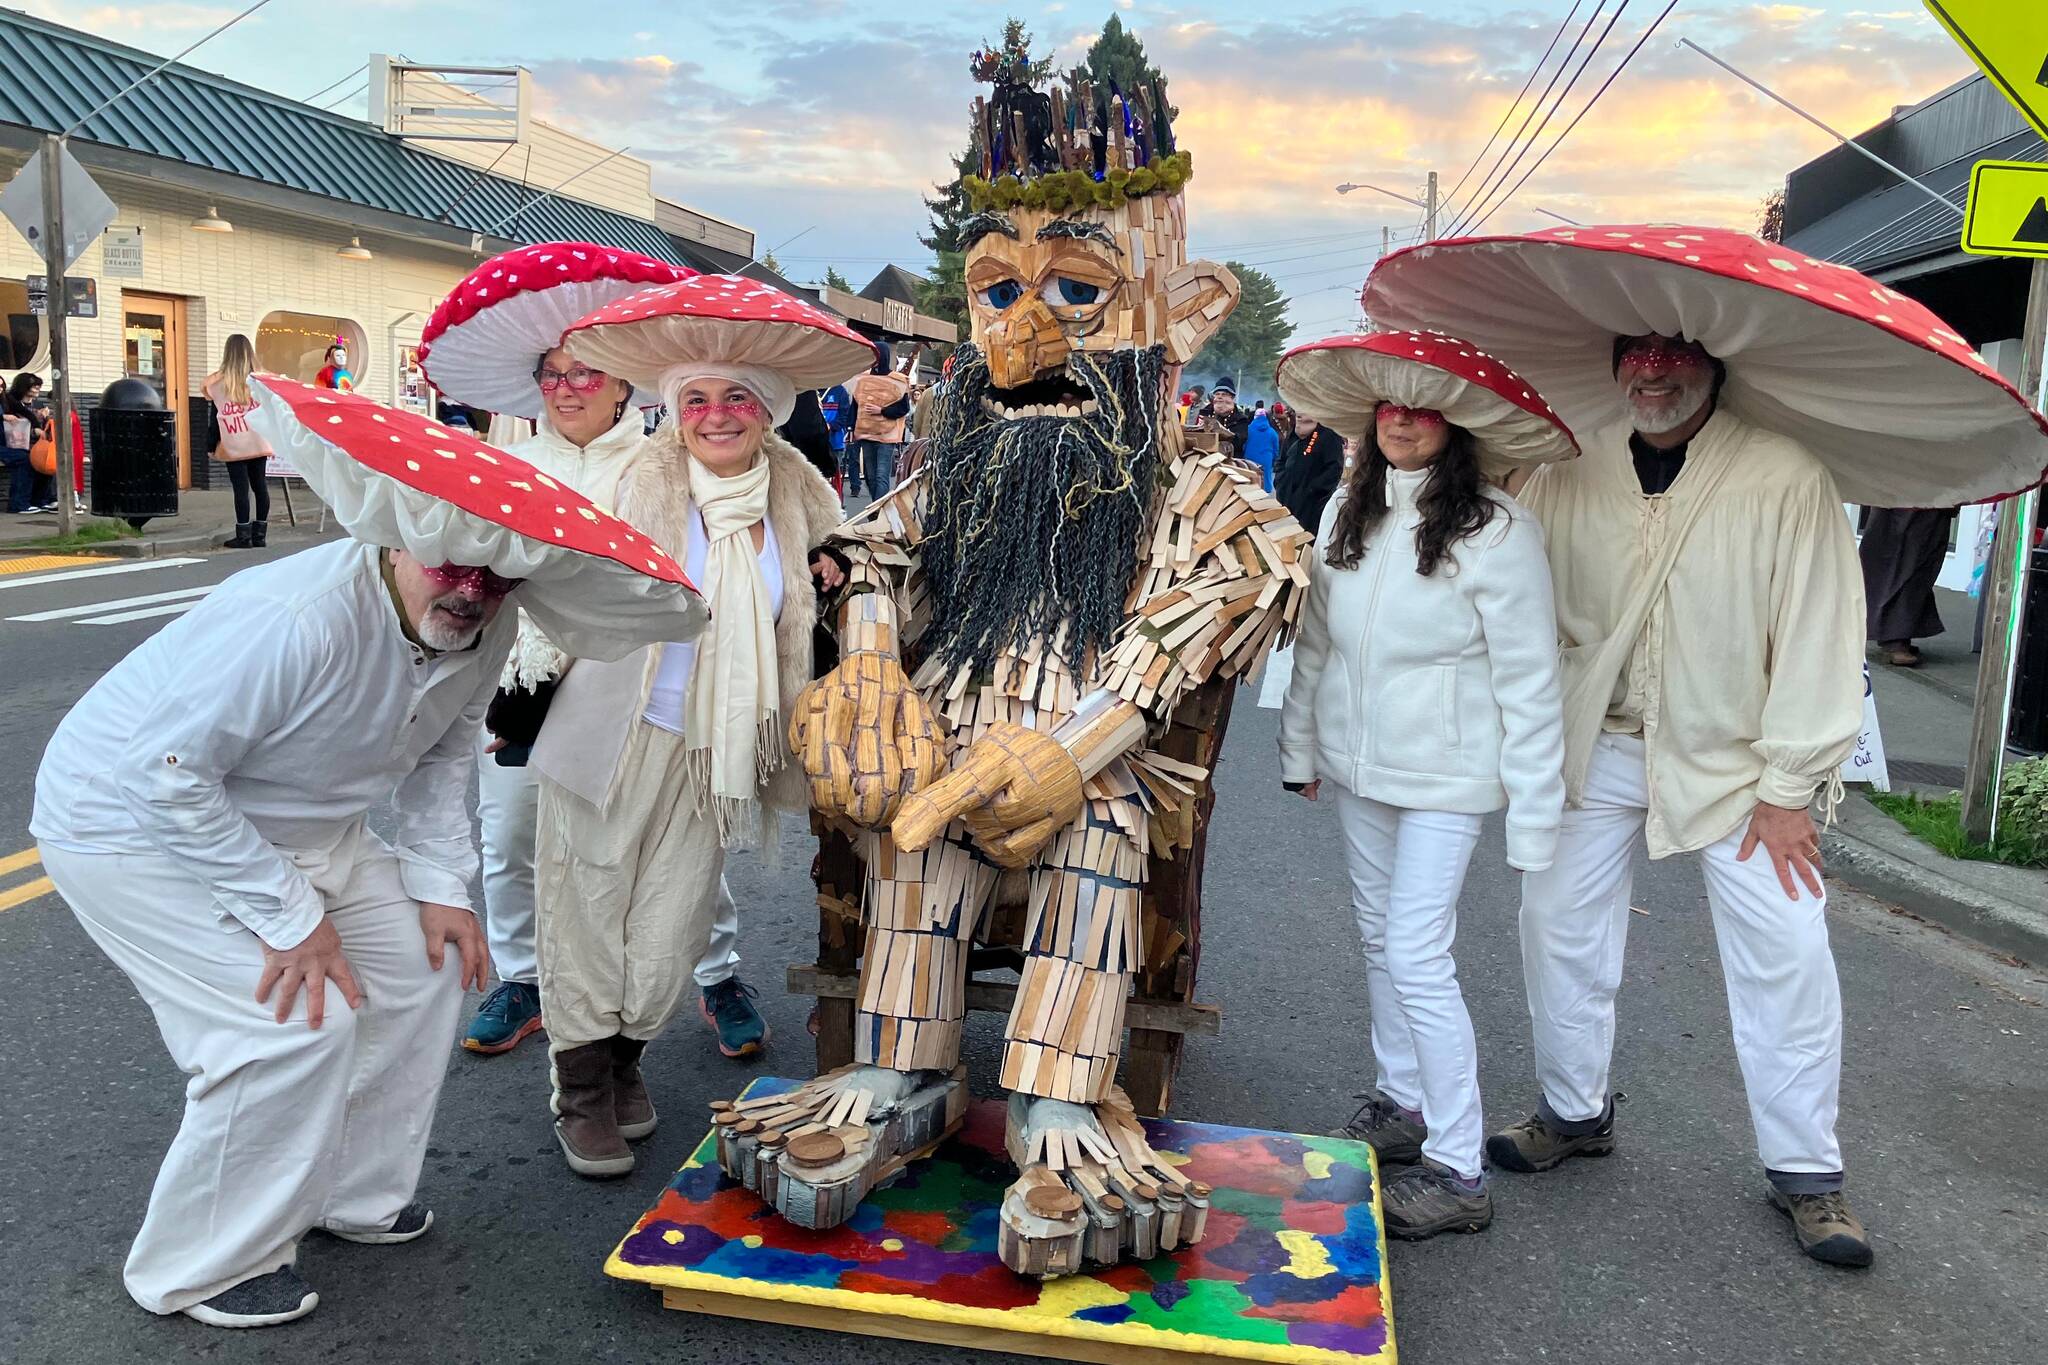 Matt Beursken, as Edgar the Forest King, surrounded by a group that calls itself “The Mushroom 5.” These fungi friends included (Left to right) Phil Levin, Amy Greenberg, Veronica Fernmoss, Elizabeth Braverman, and Brad Roter. Liz Shepherd photo